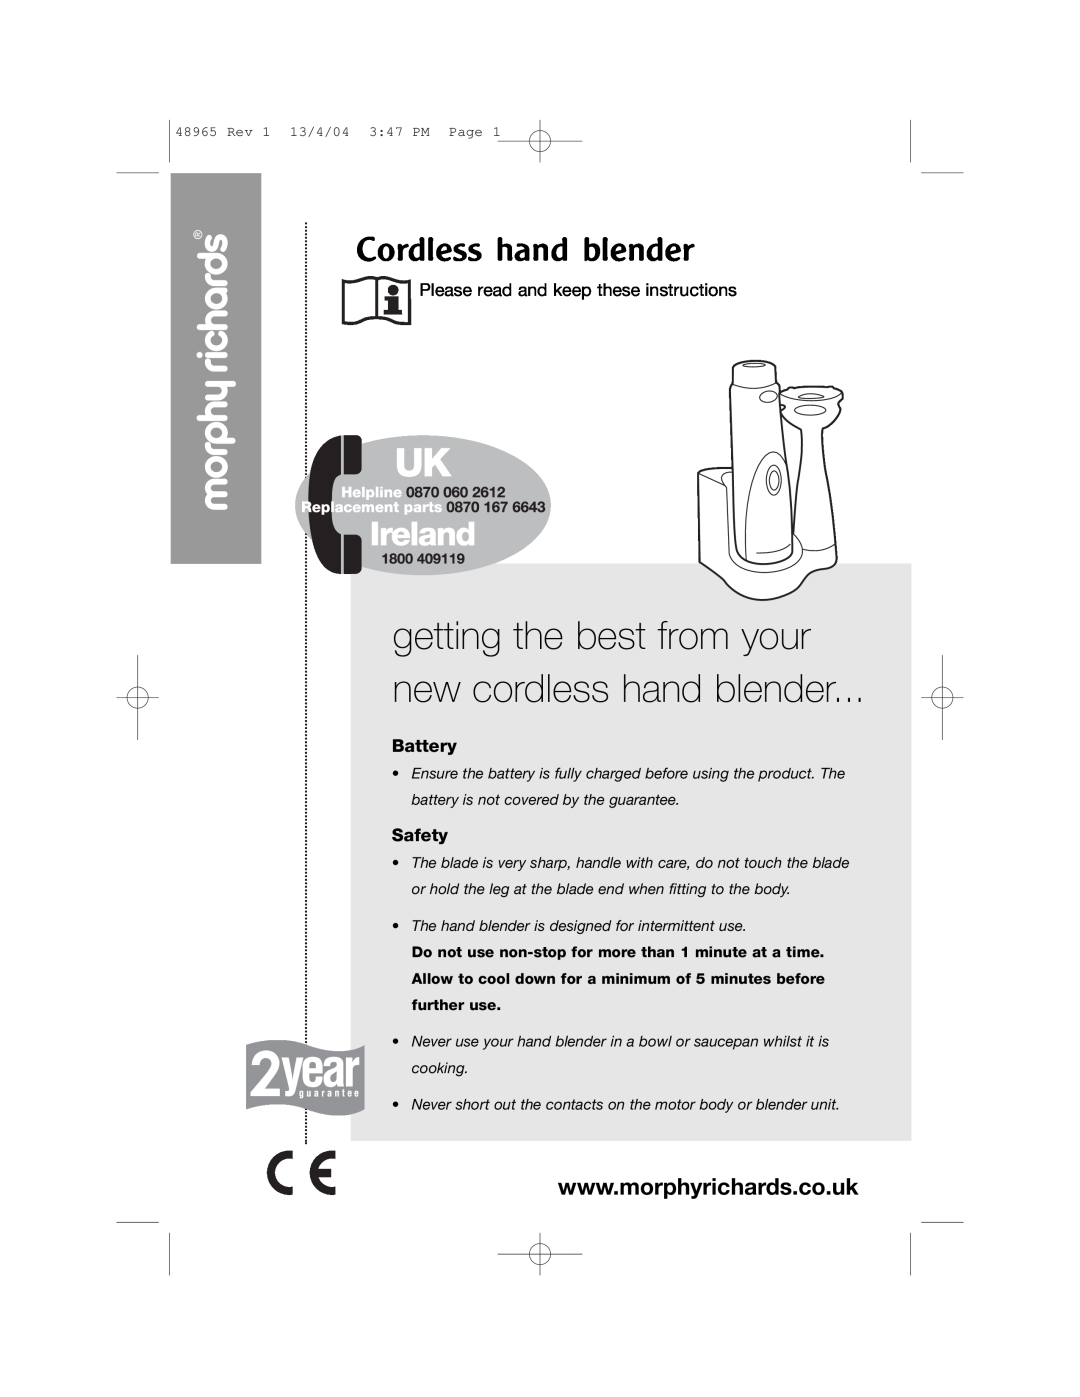 Morphy Richards Cordless hand blender manual getting the best from your new cordless hand blender, Battery, Safety 